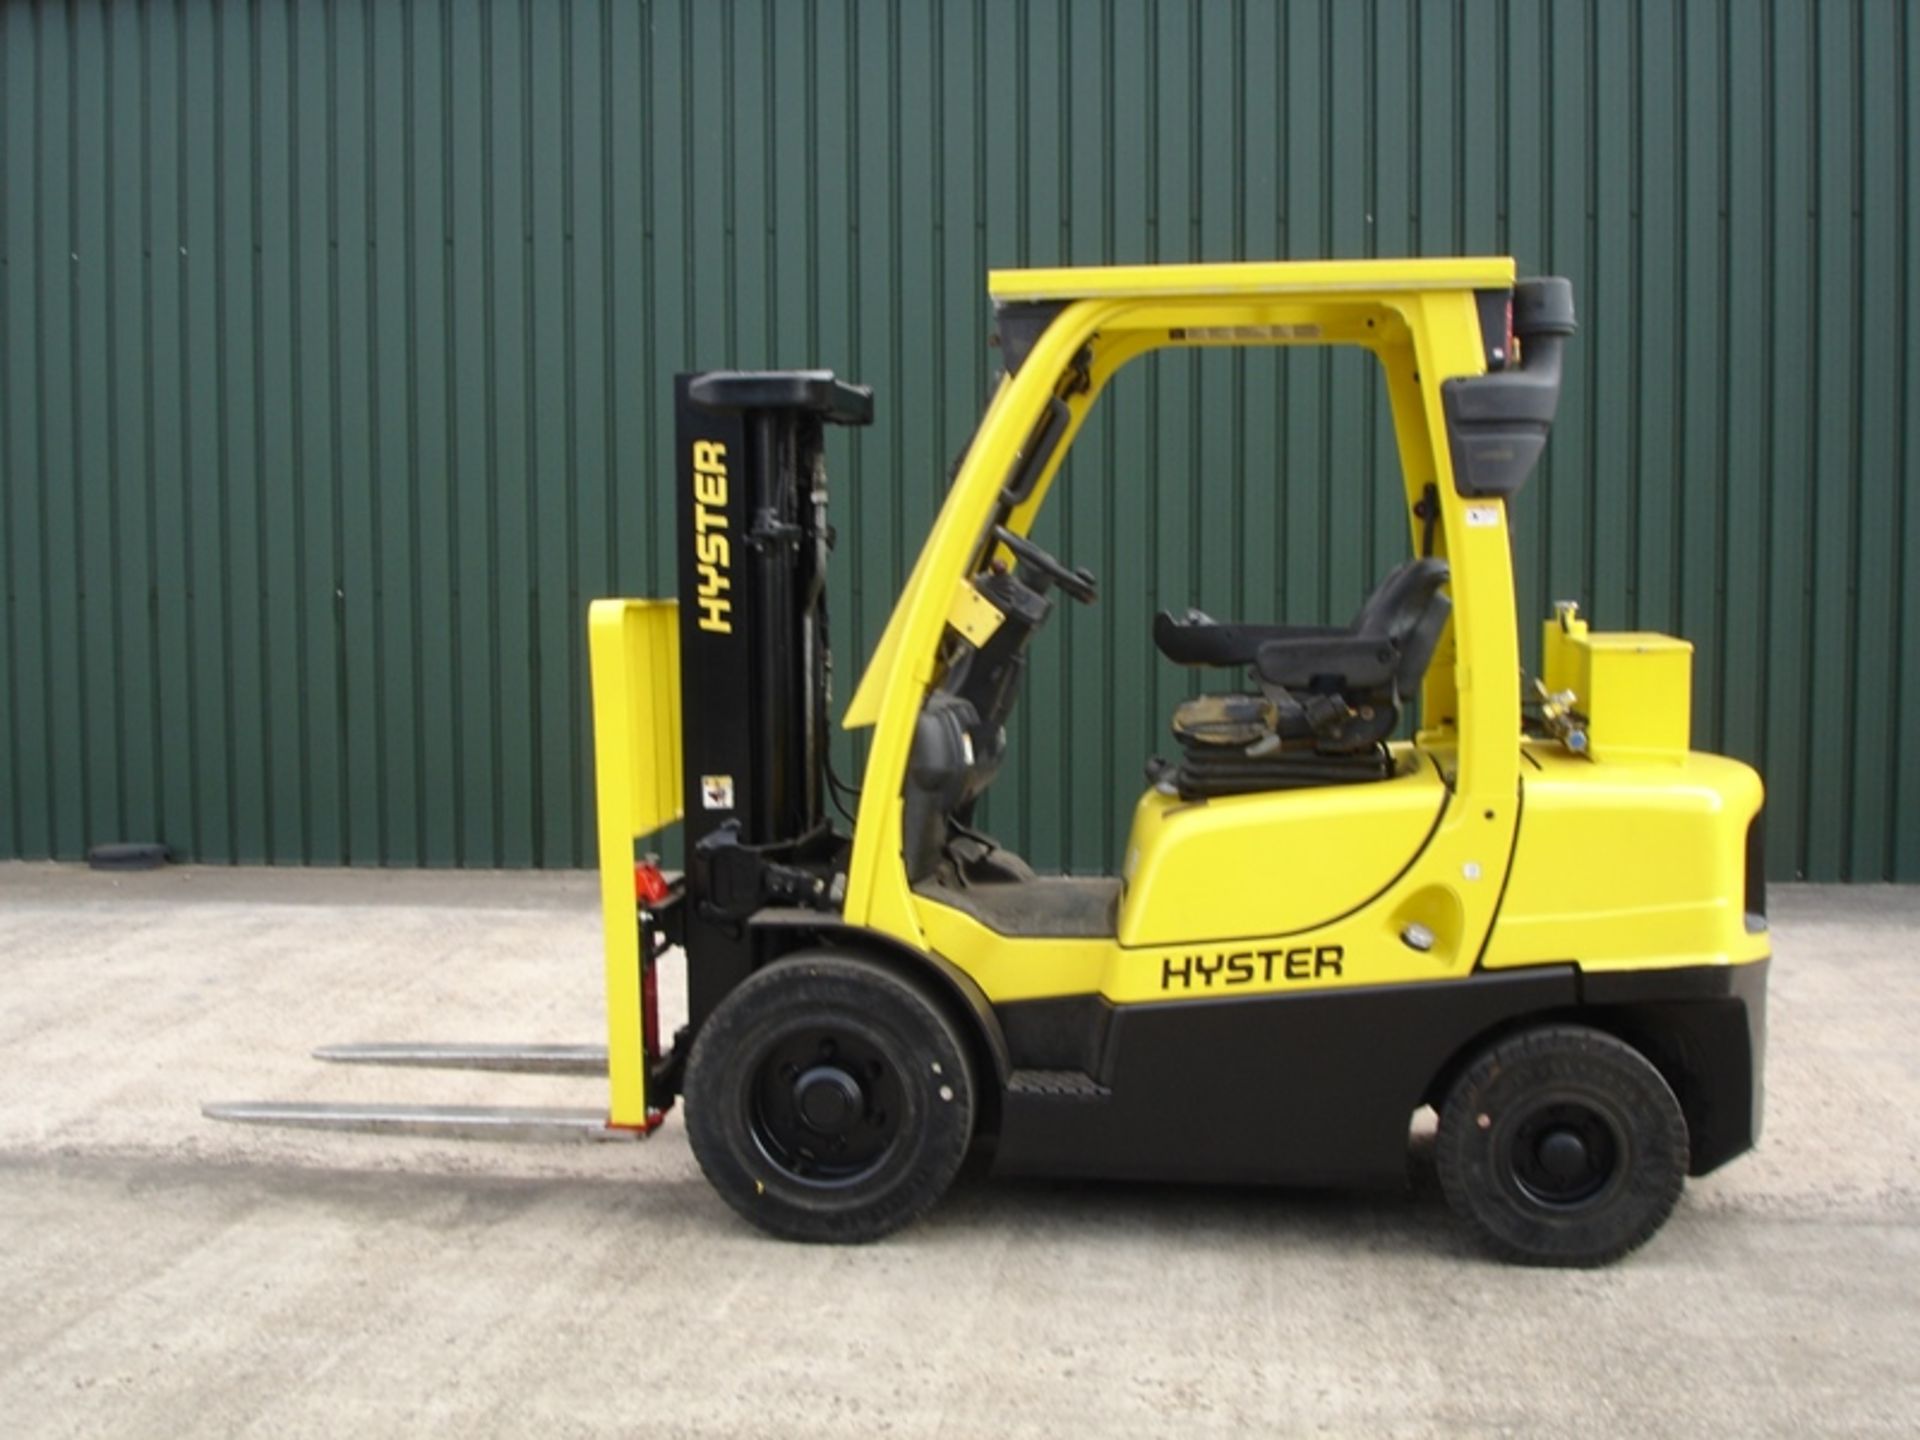 HYSTER 3.0 ton Forklift